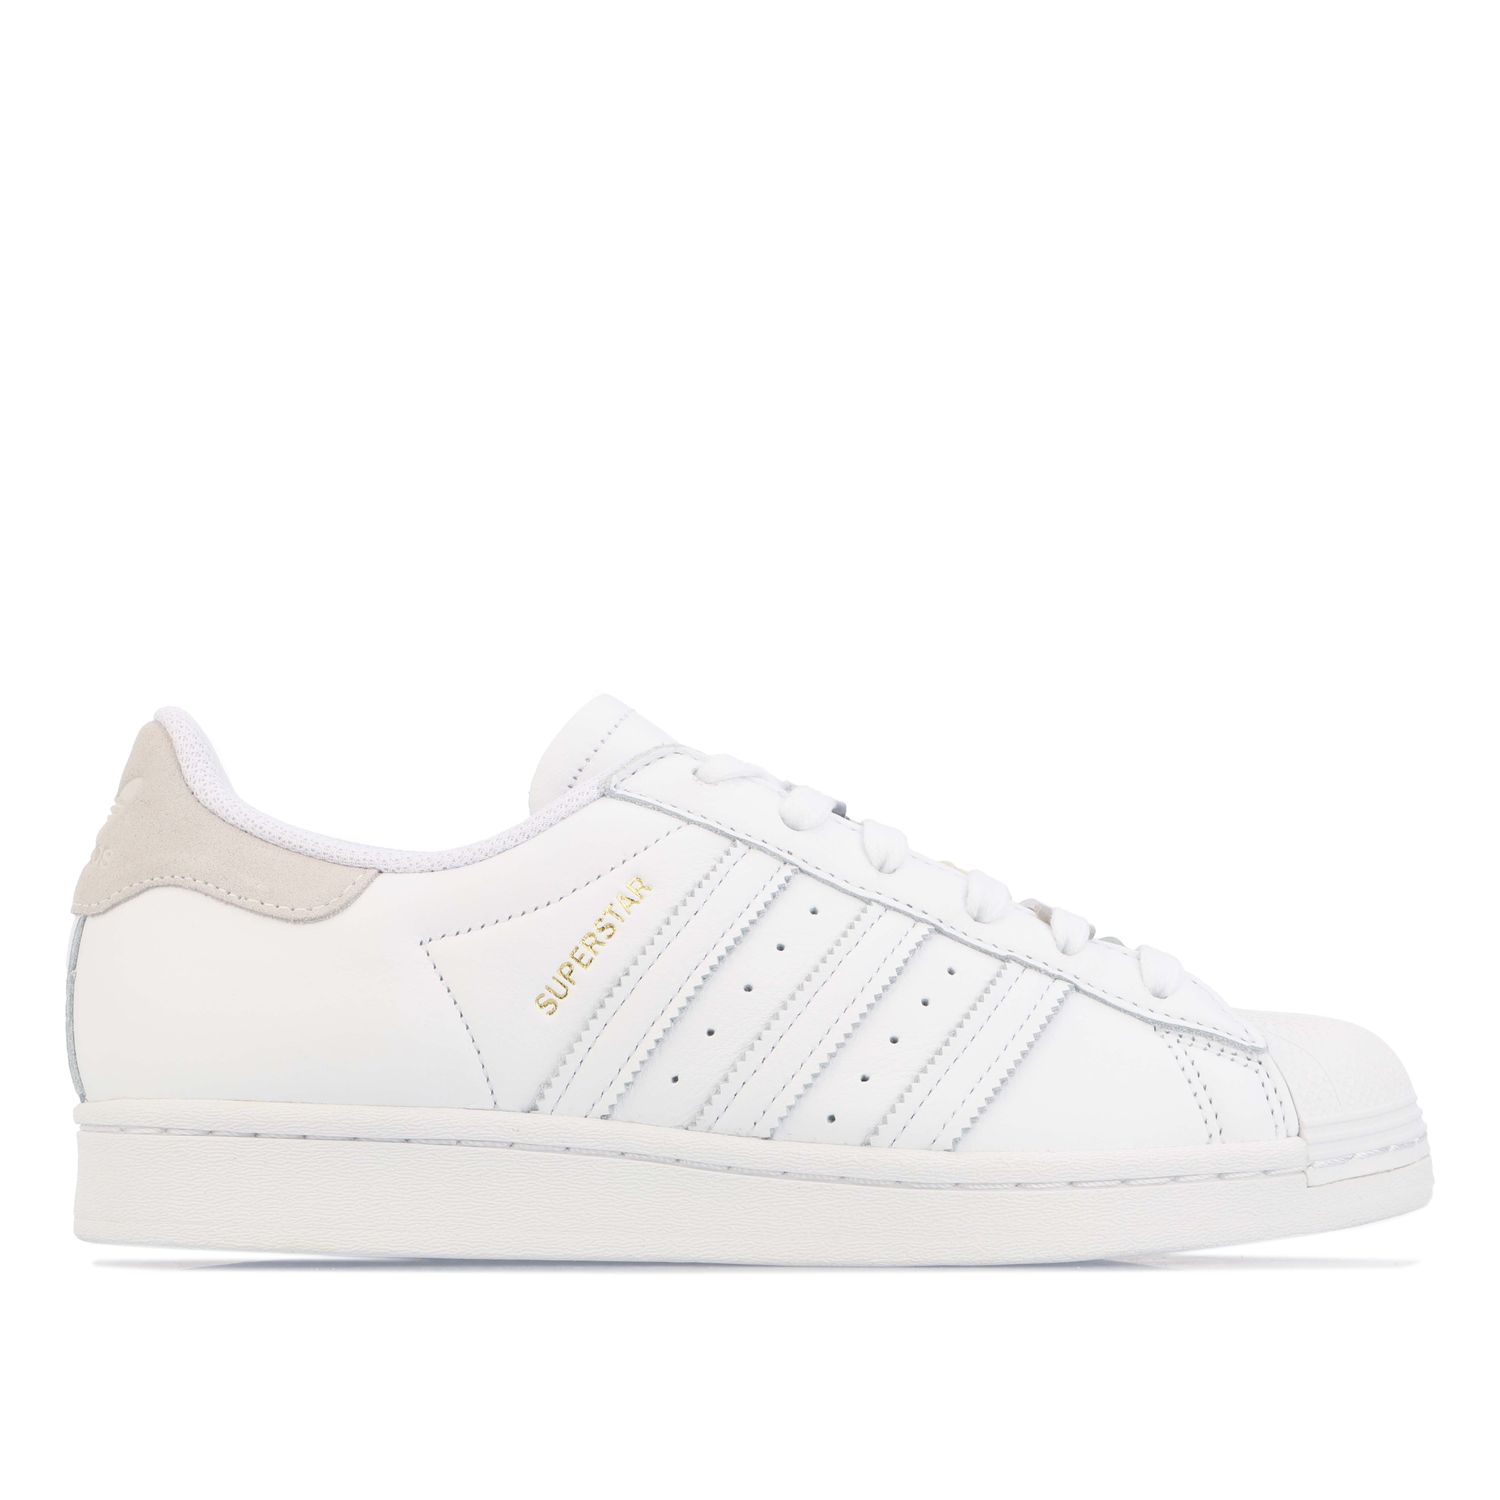 White adidas Superstar Trainers Get The